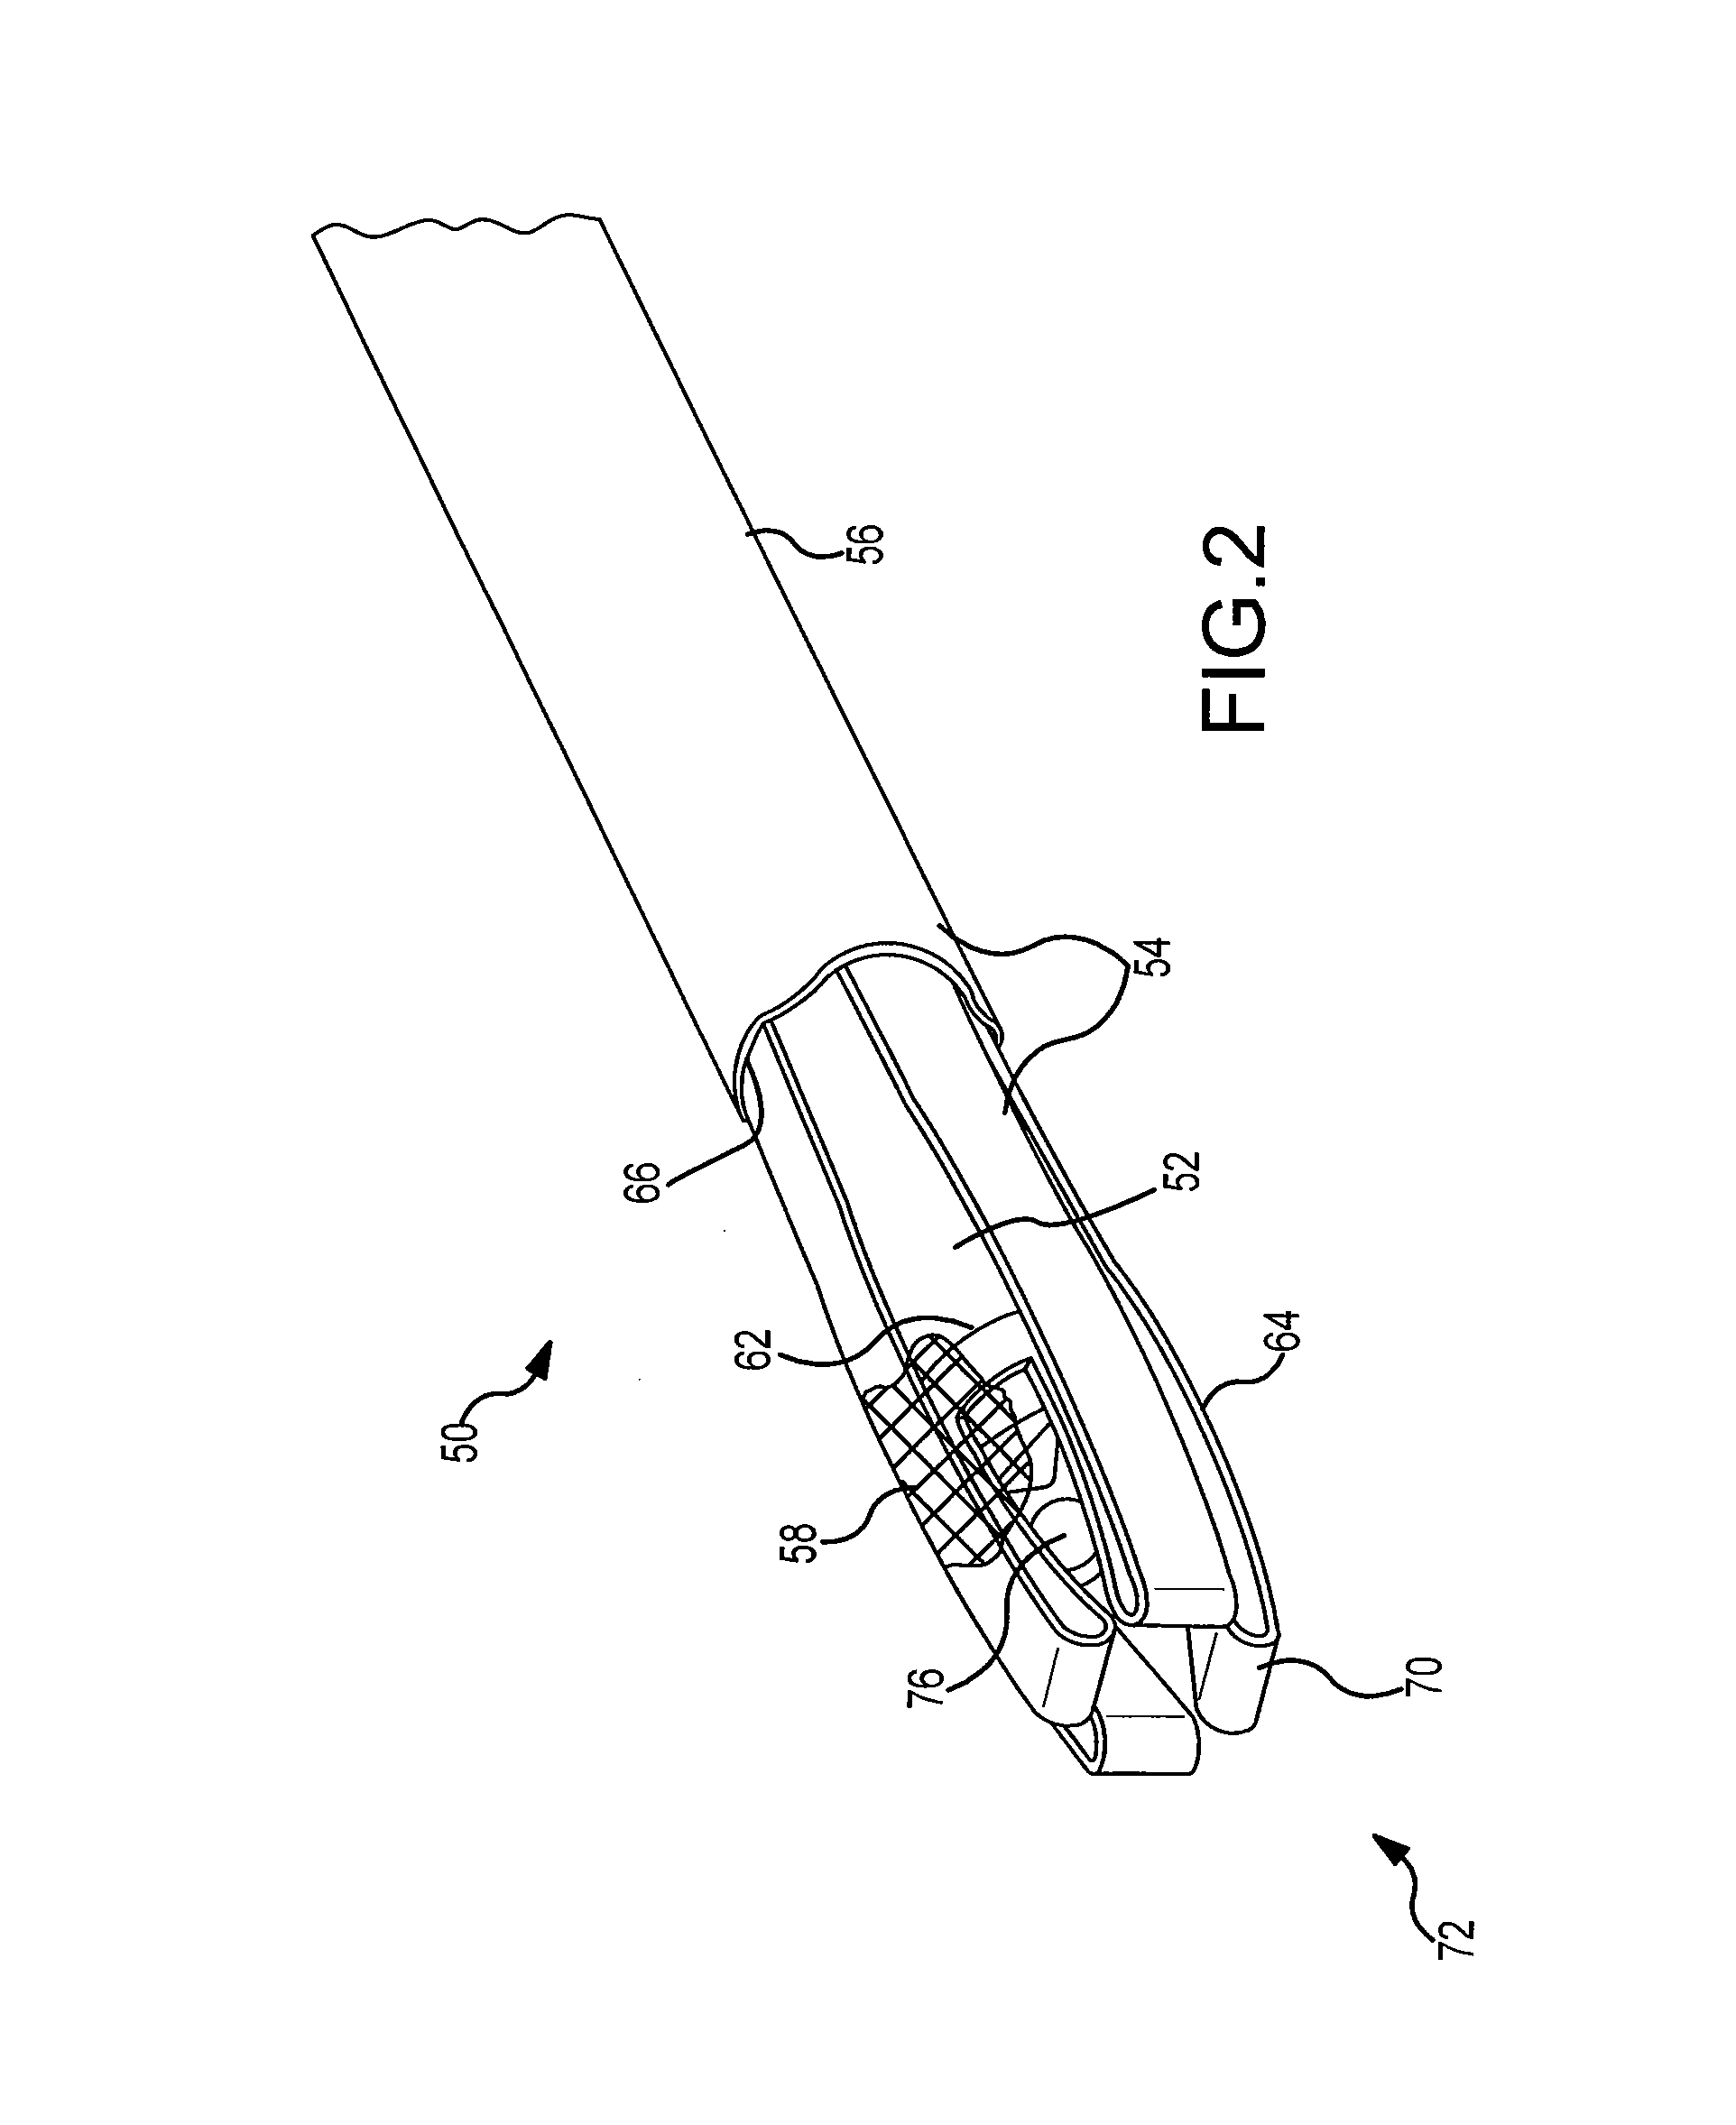 Endoscopic system for accessing constrained surgical spaces